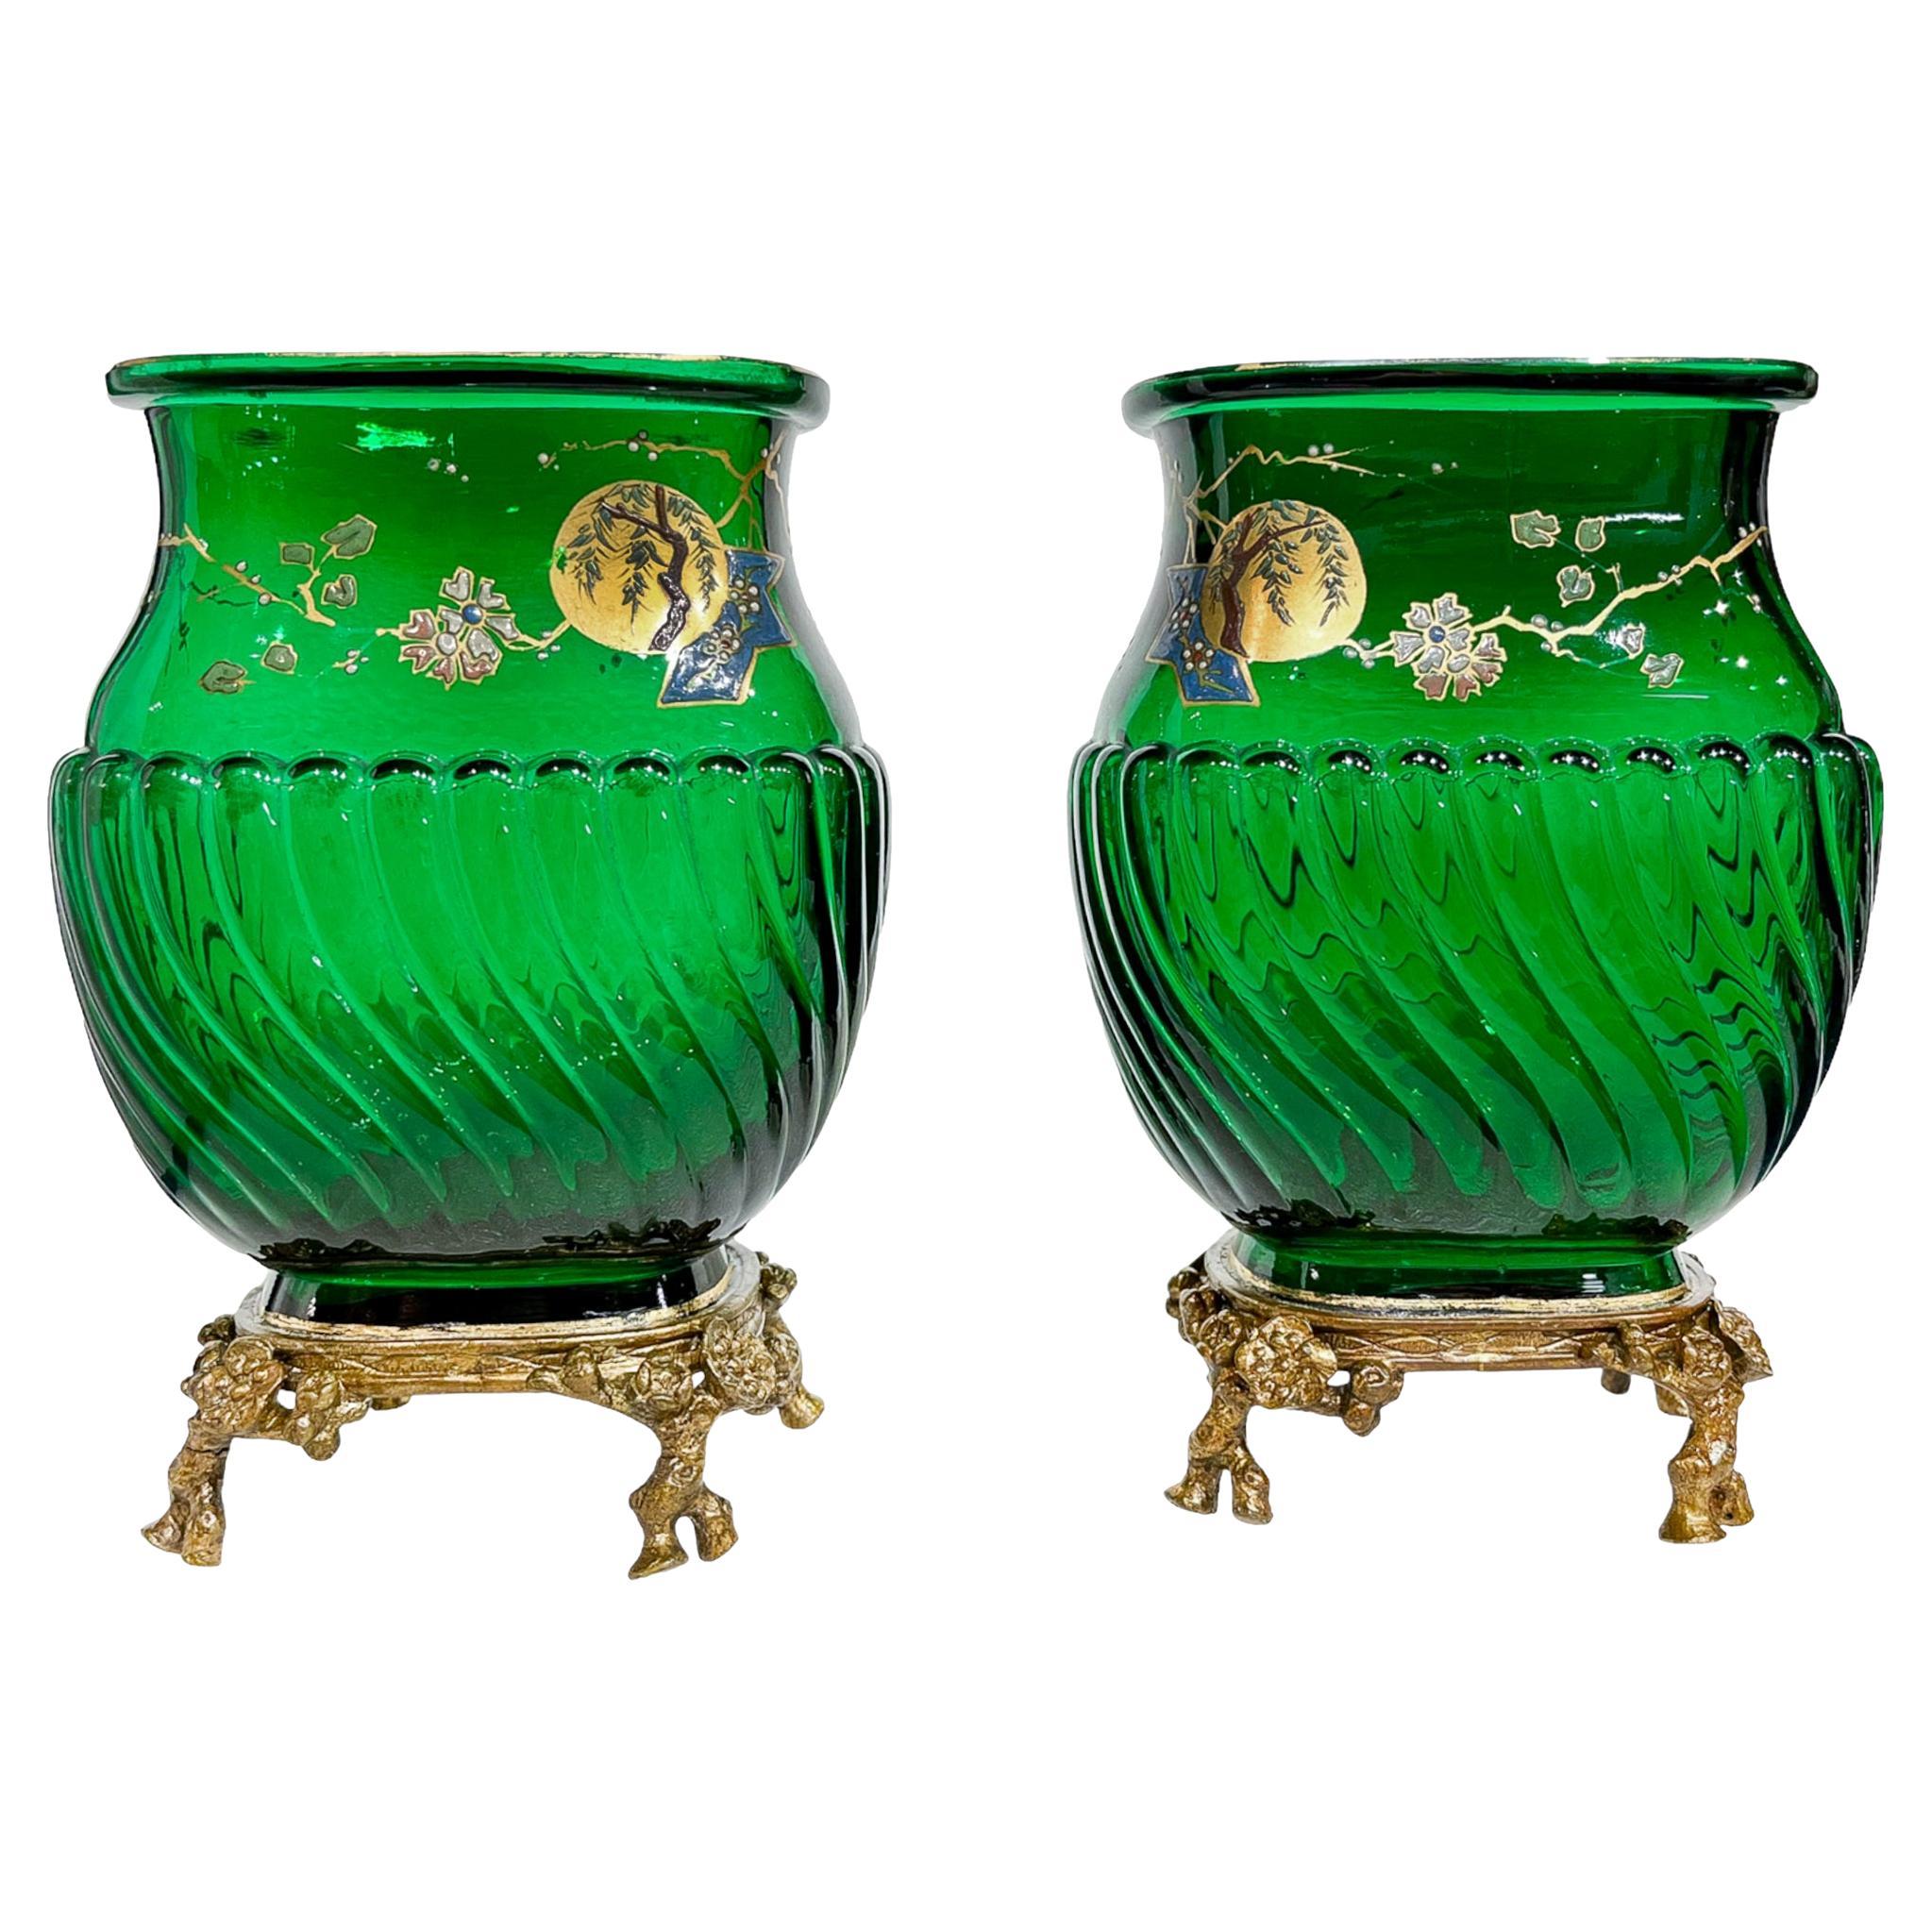 Baccarat Emerald Green Pair of Japonisme Vases with Enamel Sakura Tree and Sun  For Sale